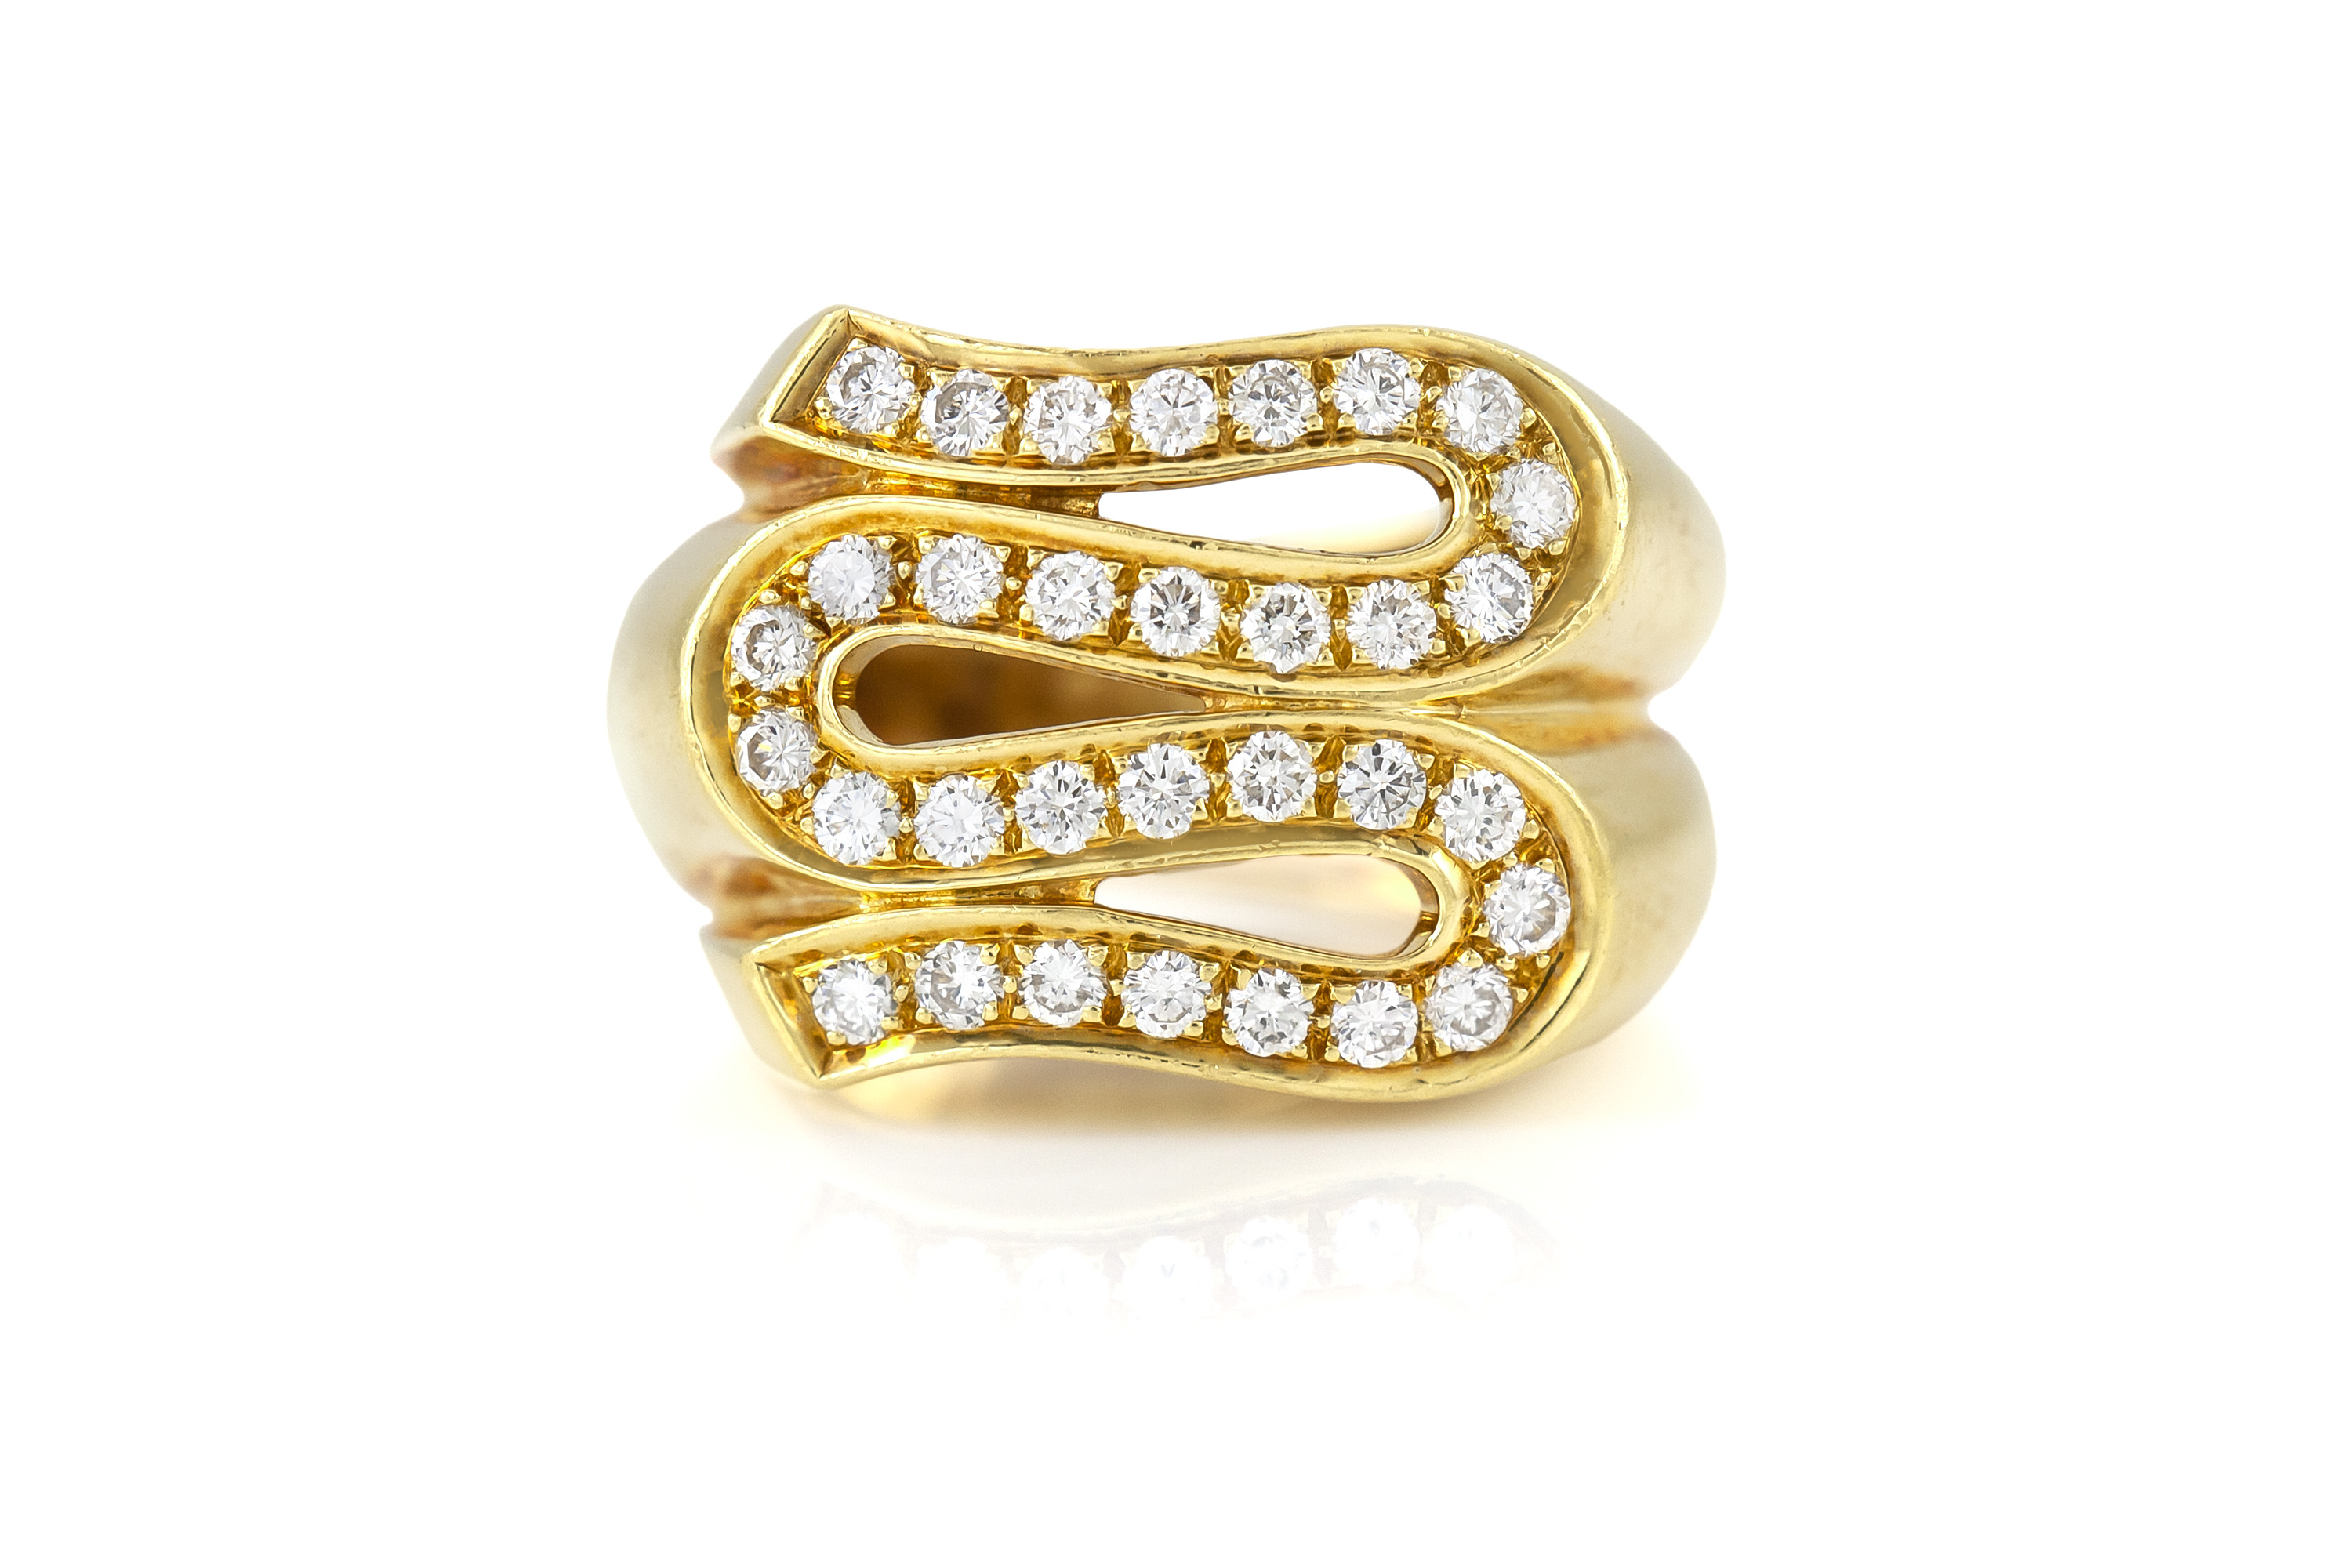  Buy Versace Gold Ring with Diamonds